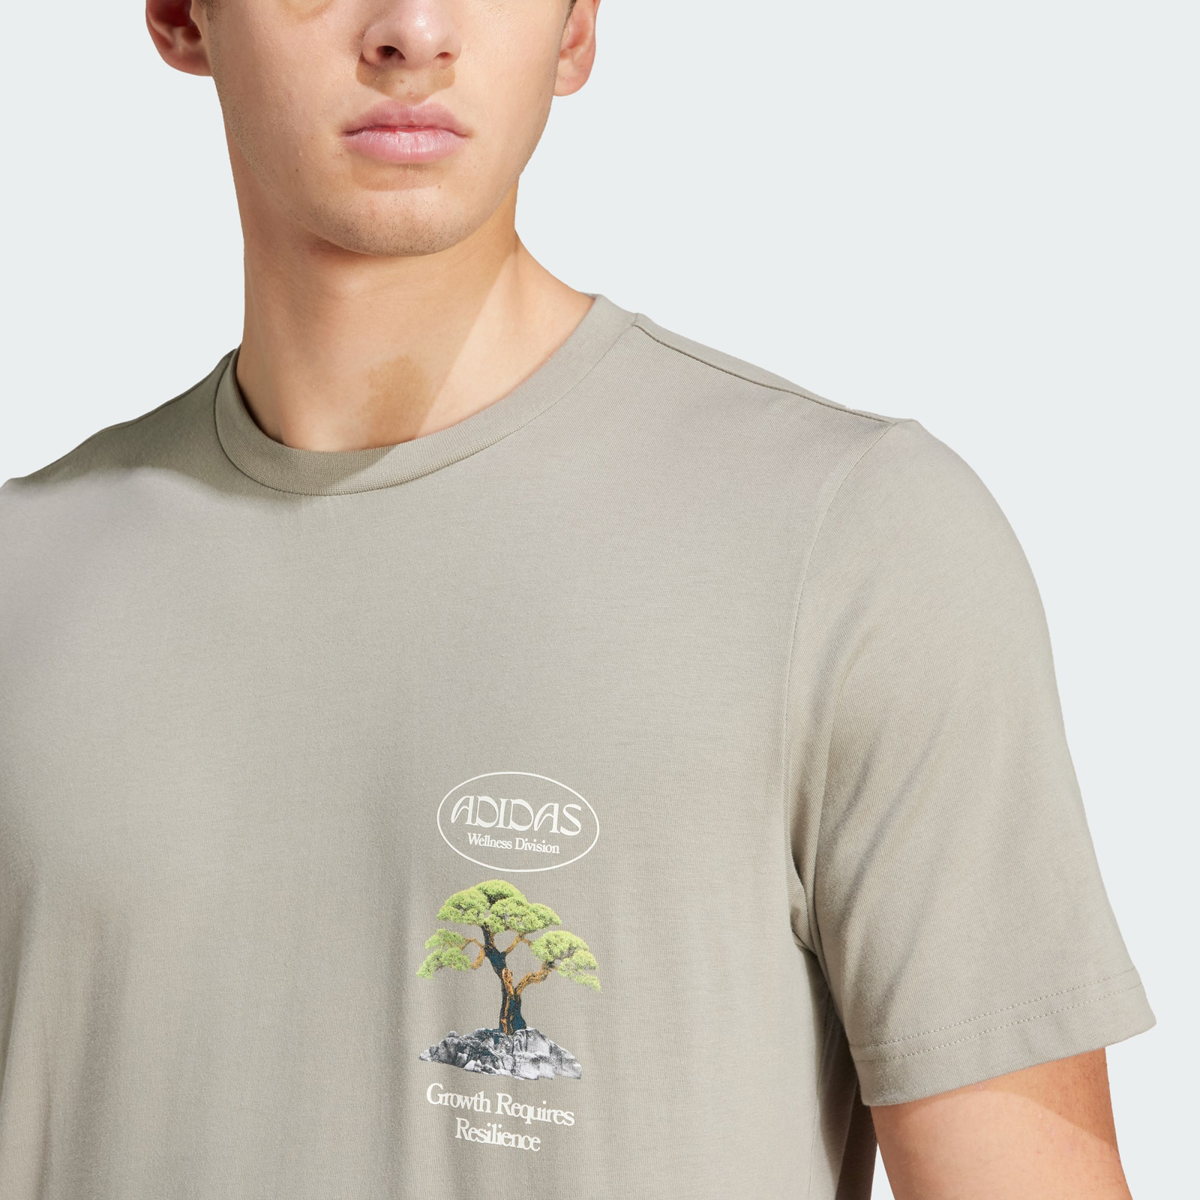 adidas-Growth-Graphic-T-Shirt-Silver-Pebble-3